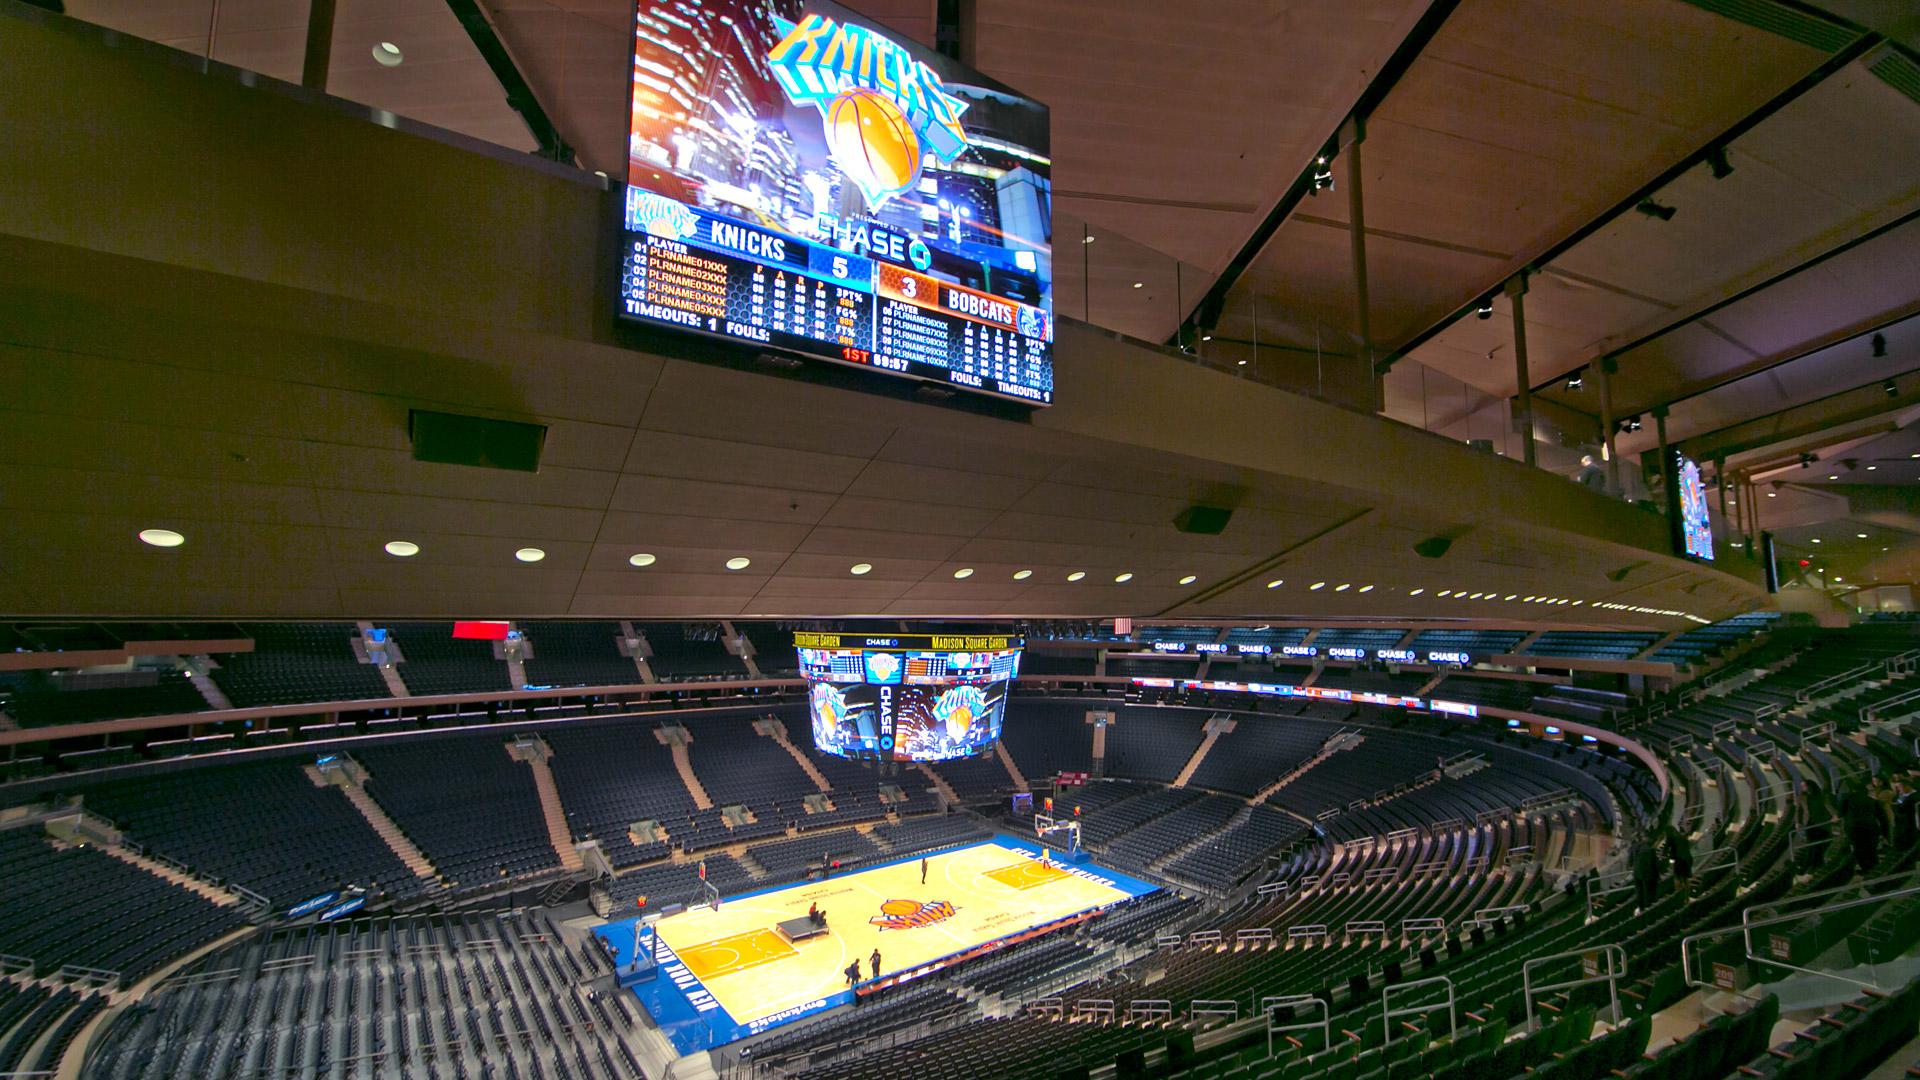 Madison Square Garden exec says arena reopening 'earlier than